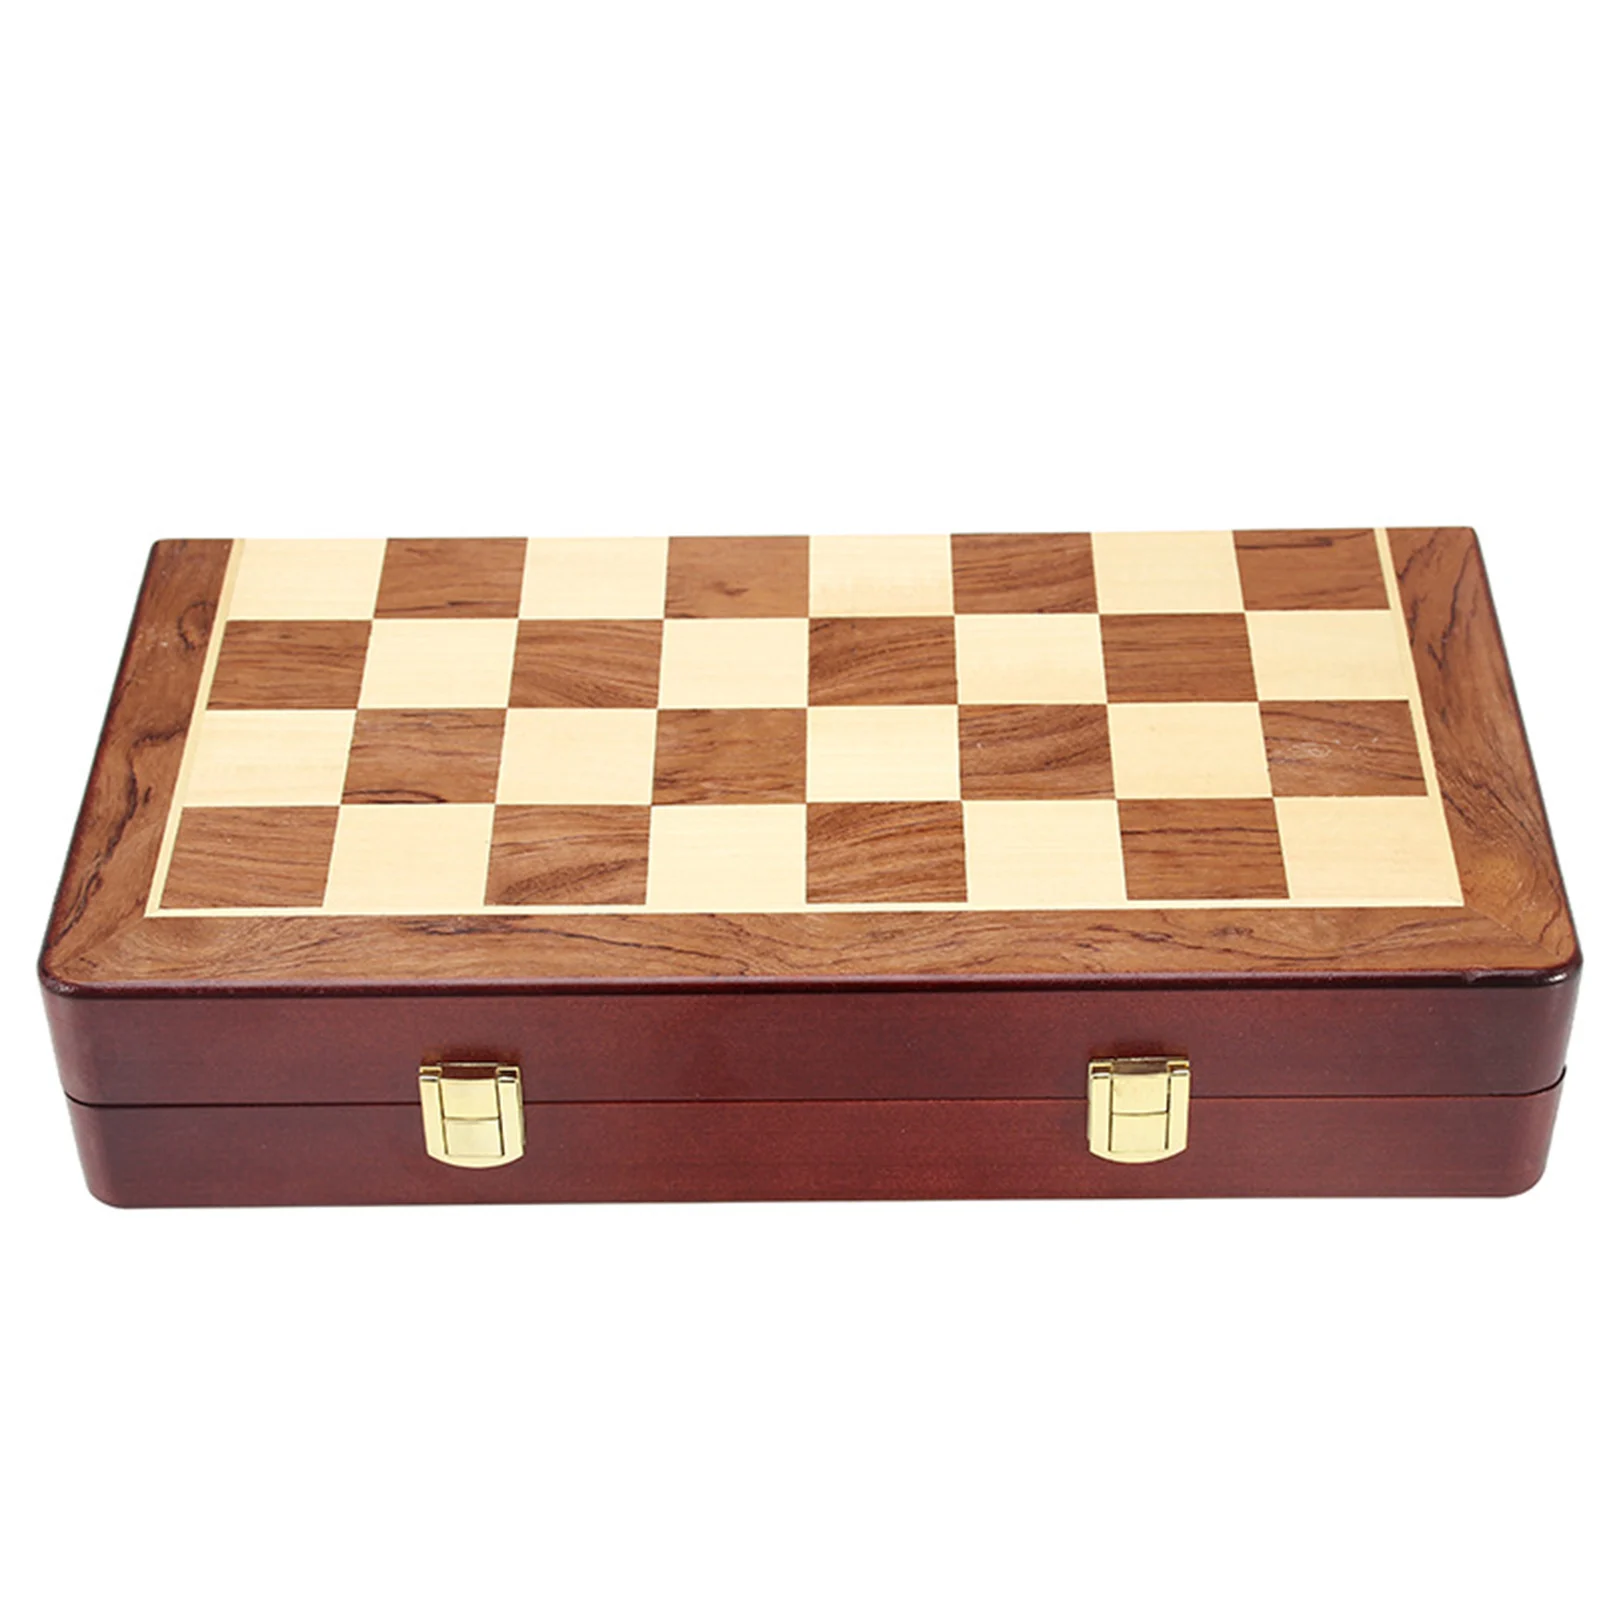 Metel Chess Pieces Wooden Chessboard Chess Game Set Beginner Chess Set for Kids and Adults High Quality Chess 6